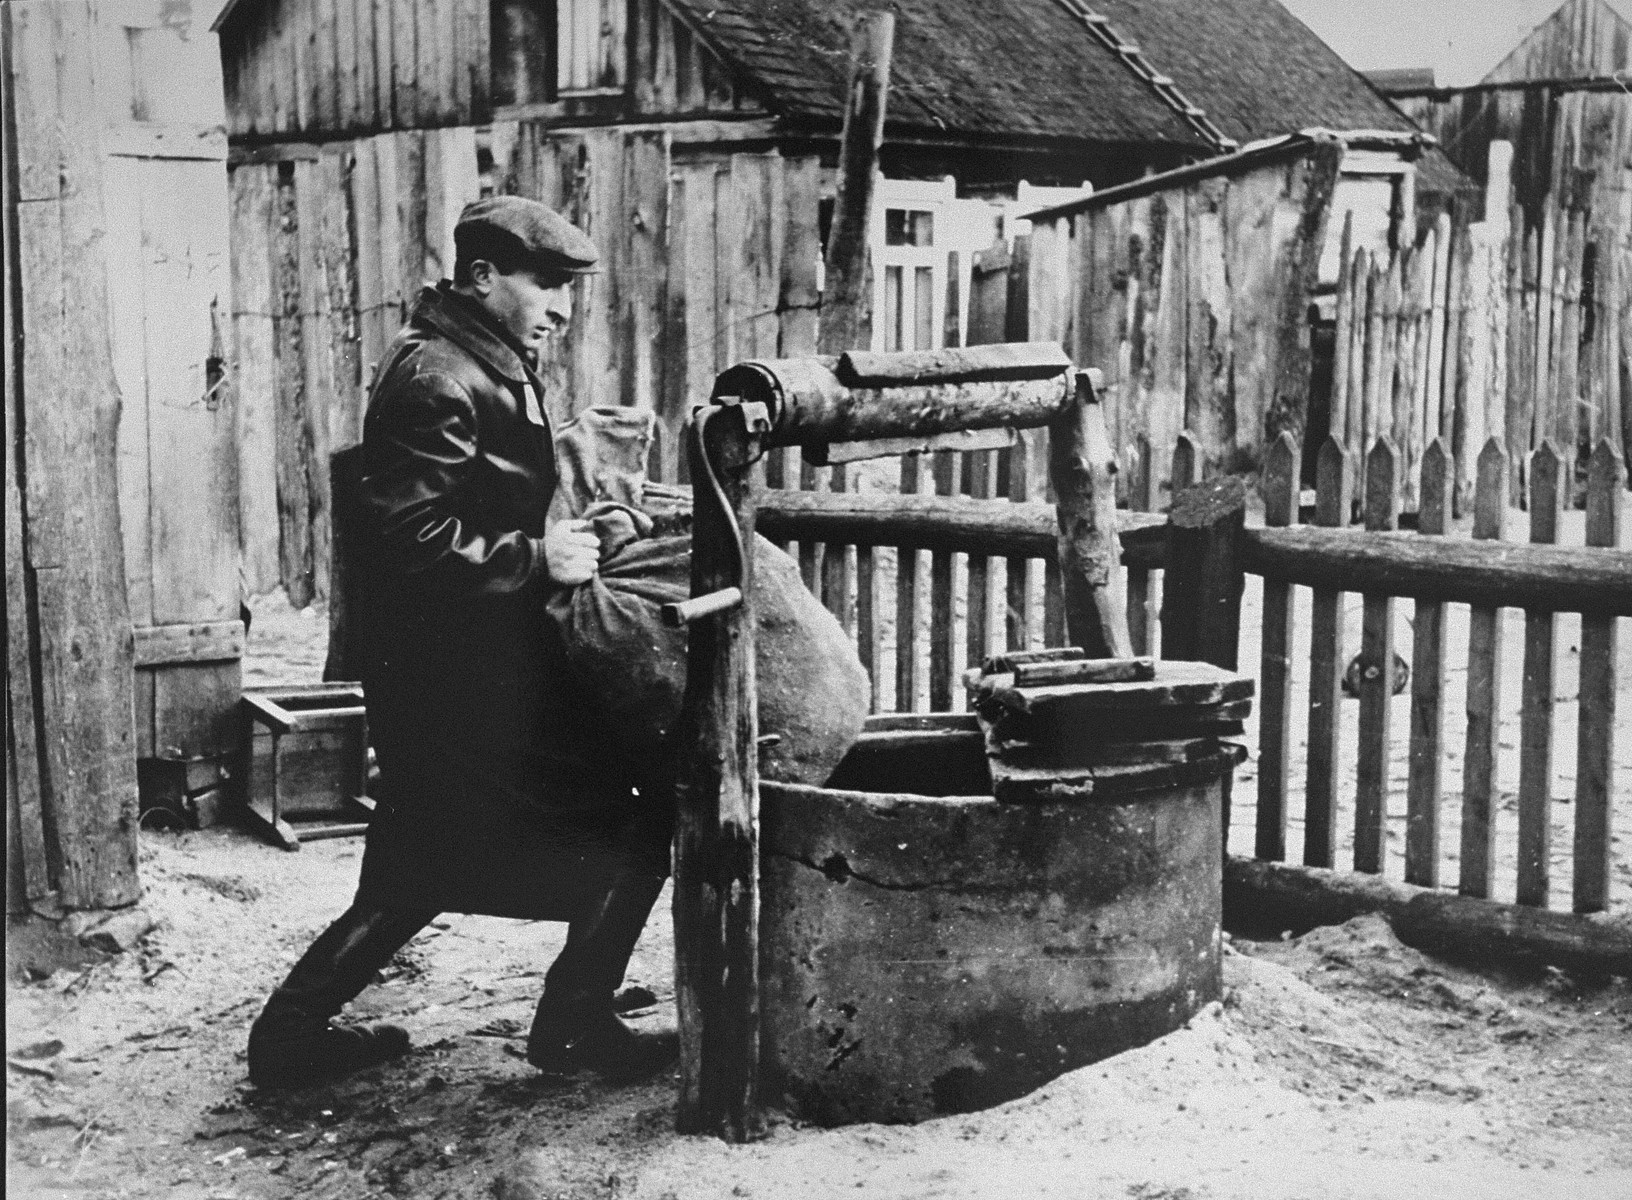 Judke (Yehuda) Levitt hides supplies in the well. Jews in the Kovno ghetto started to build and prepare hide outs, bunkers,(melinas) for storage of food, medicine, guns, etc.